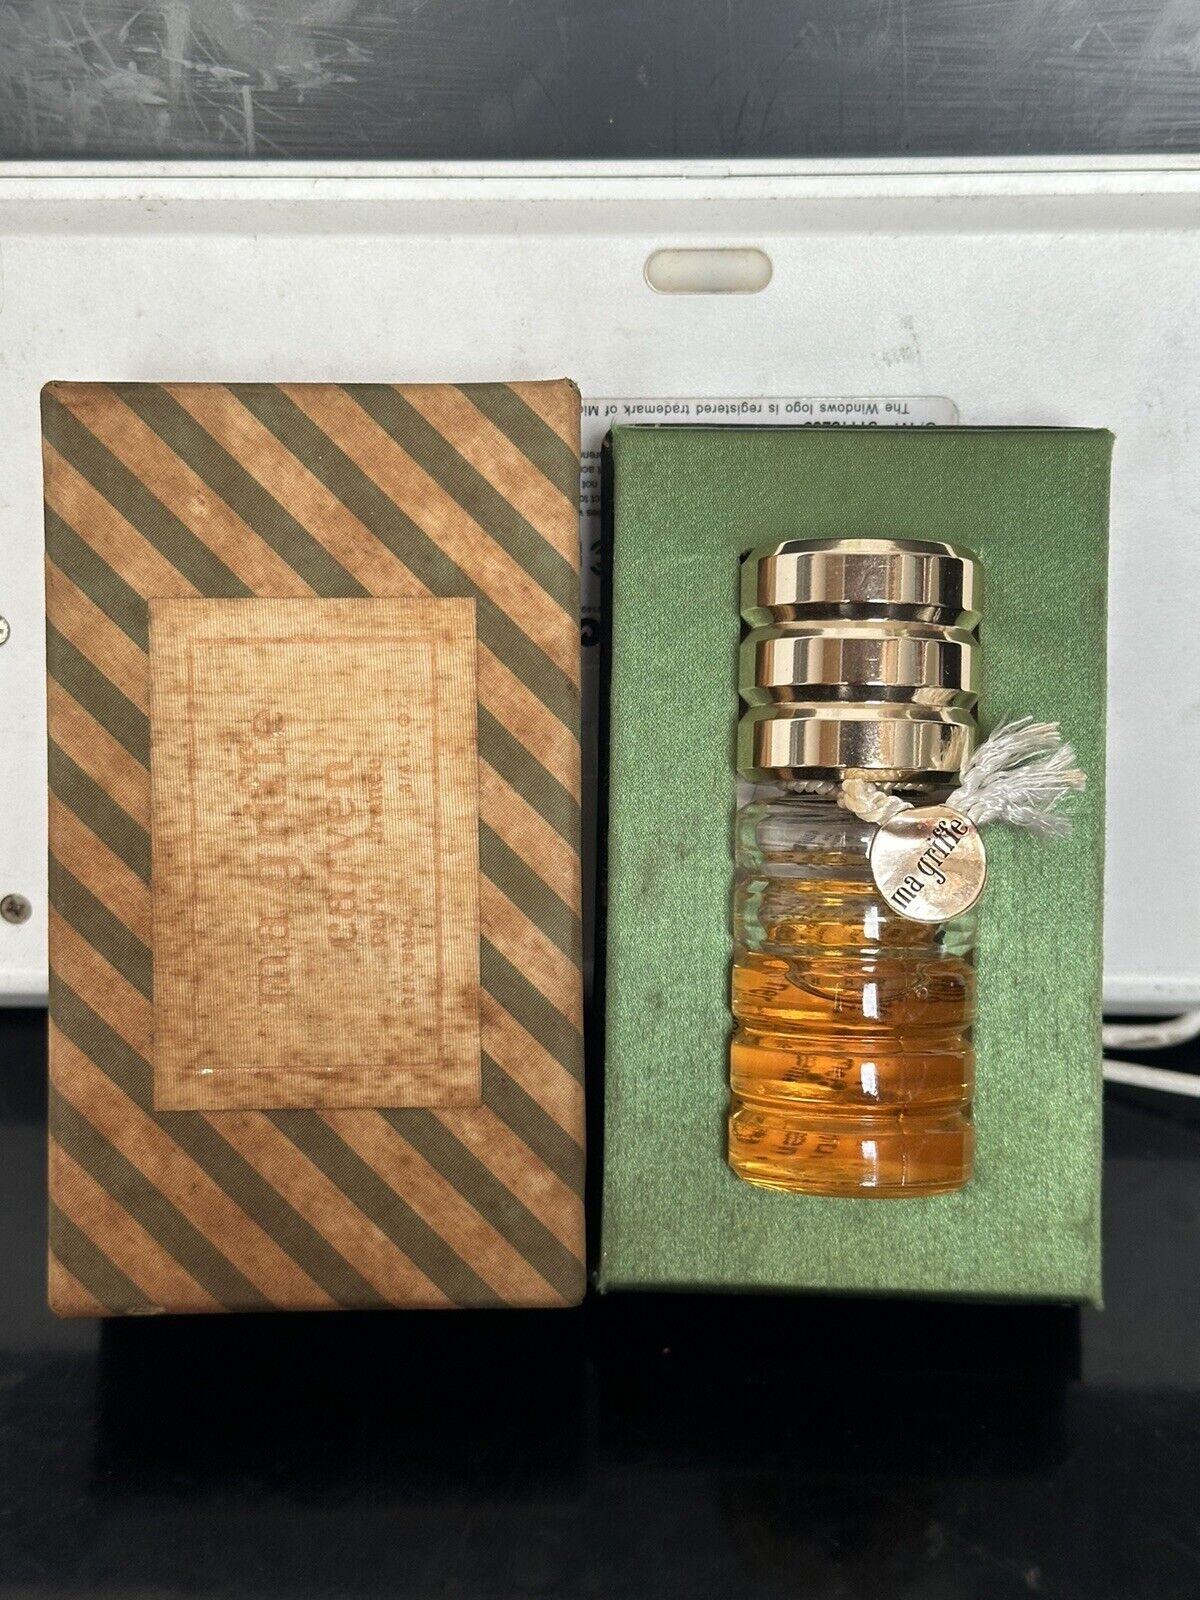 VINTAGE MA GRIFFEN CARVEN PERFUM W/BOX FRANCE MADE